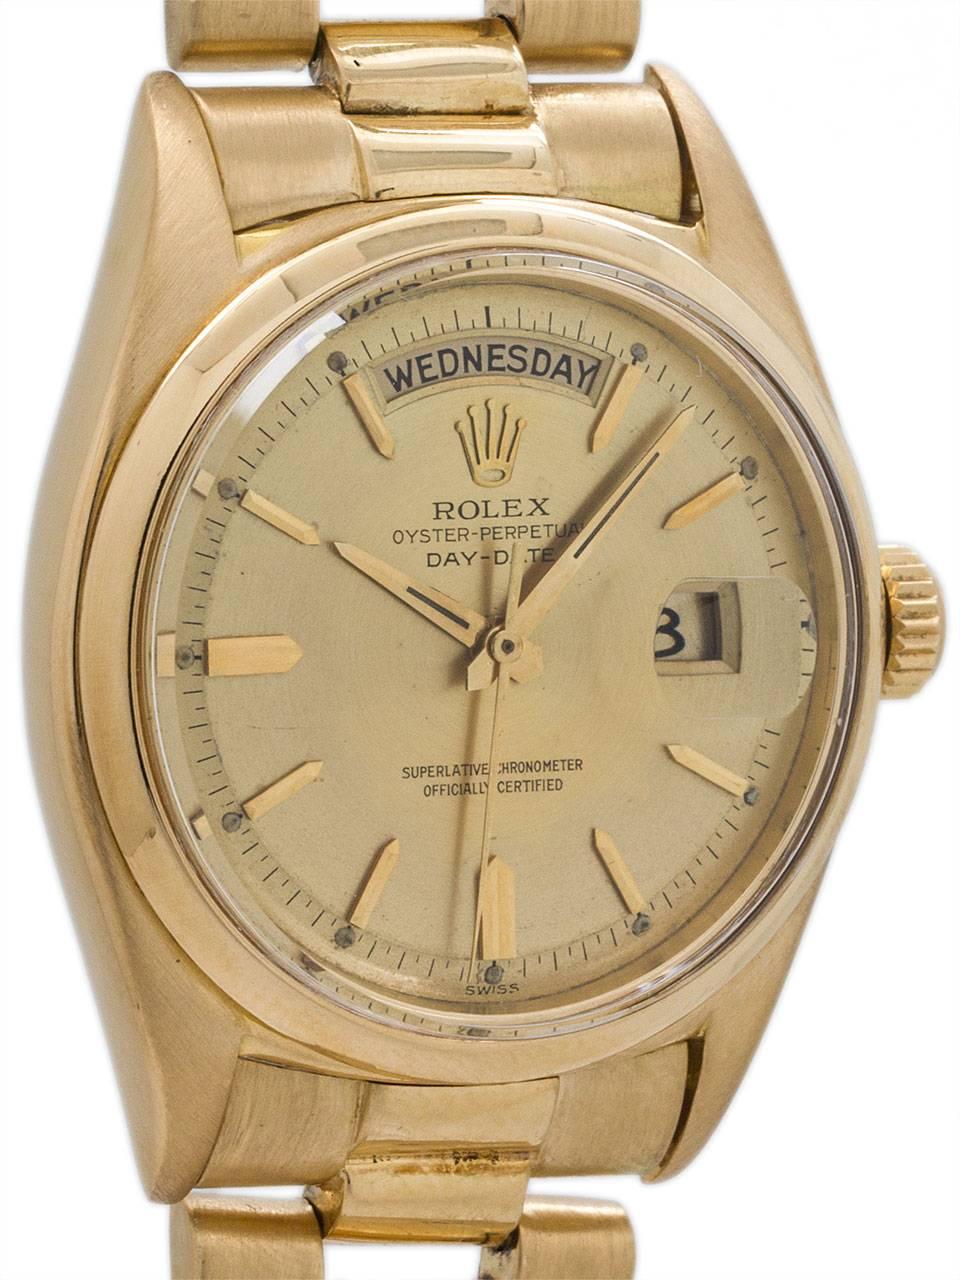 Vintage Rolex Day Date President ref 1802 circa 1963. Featuring 36mm diameter case with defining characteristic smooth bezel of the 1802 ref no. Acrylic crystal and original champagne pie pan dial with applied gold indexes and tapered gilt dauphine